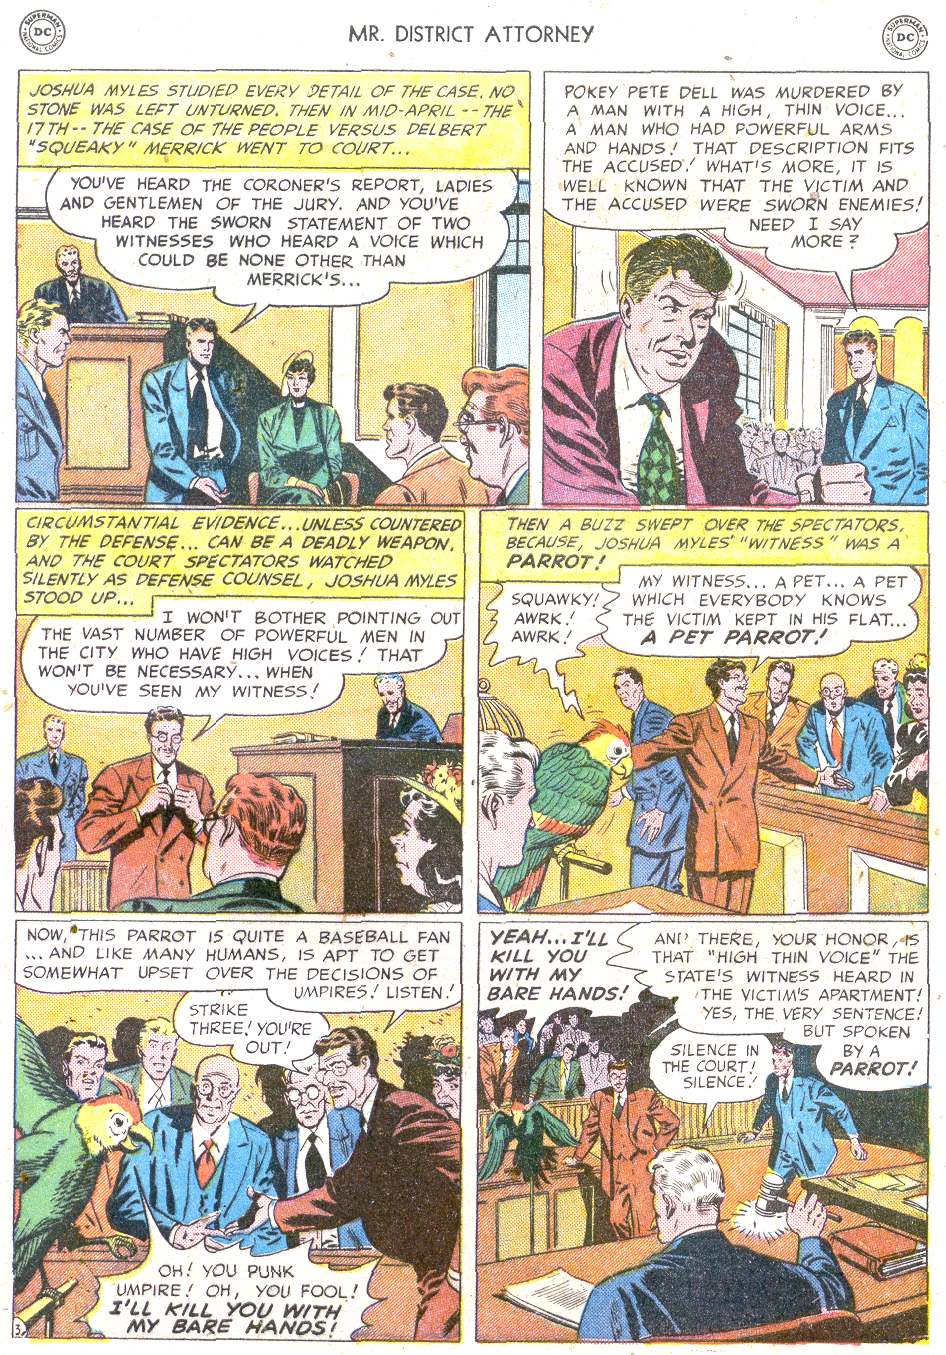 Read online Mr. District Attorney comic -  Issue #15 - 41